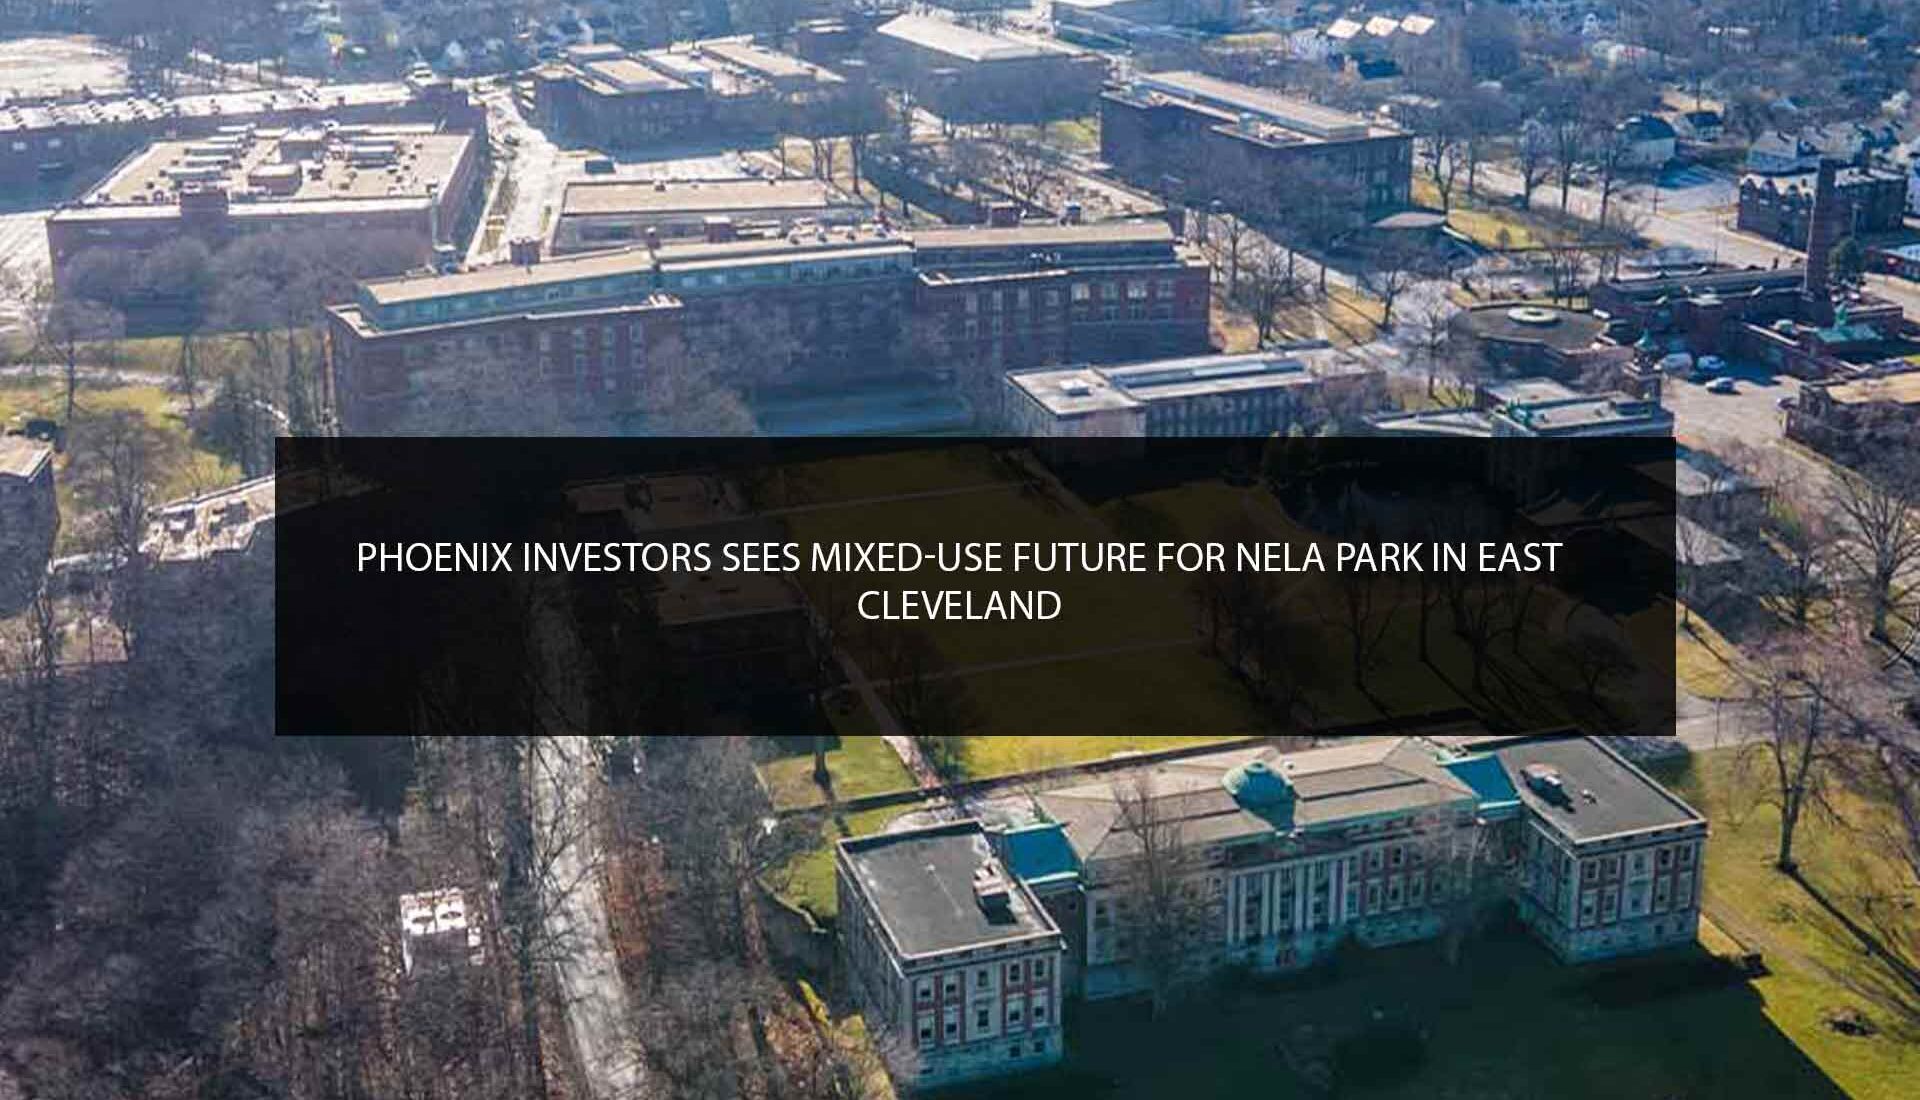 Phoenix Investors sees mixed-use future for Nela Park in East Cleveland